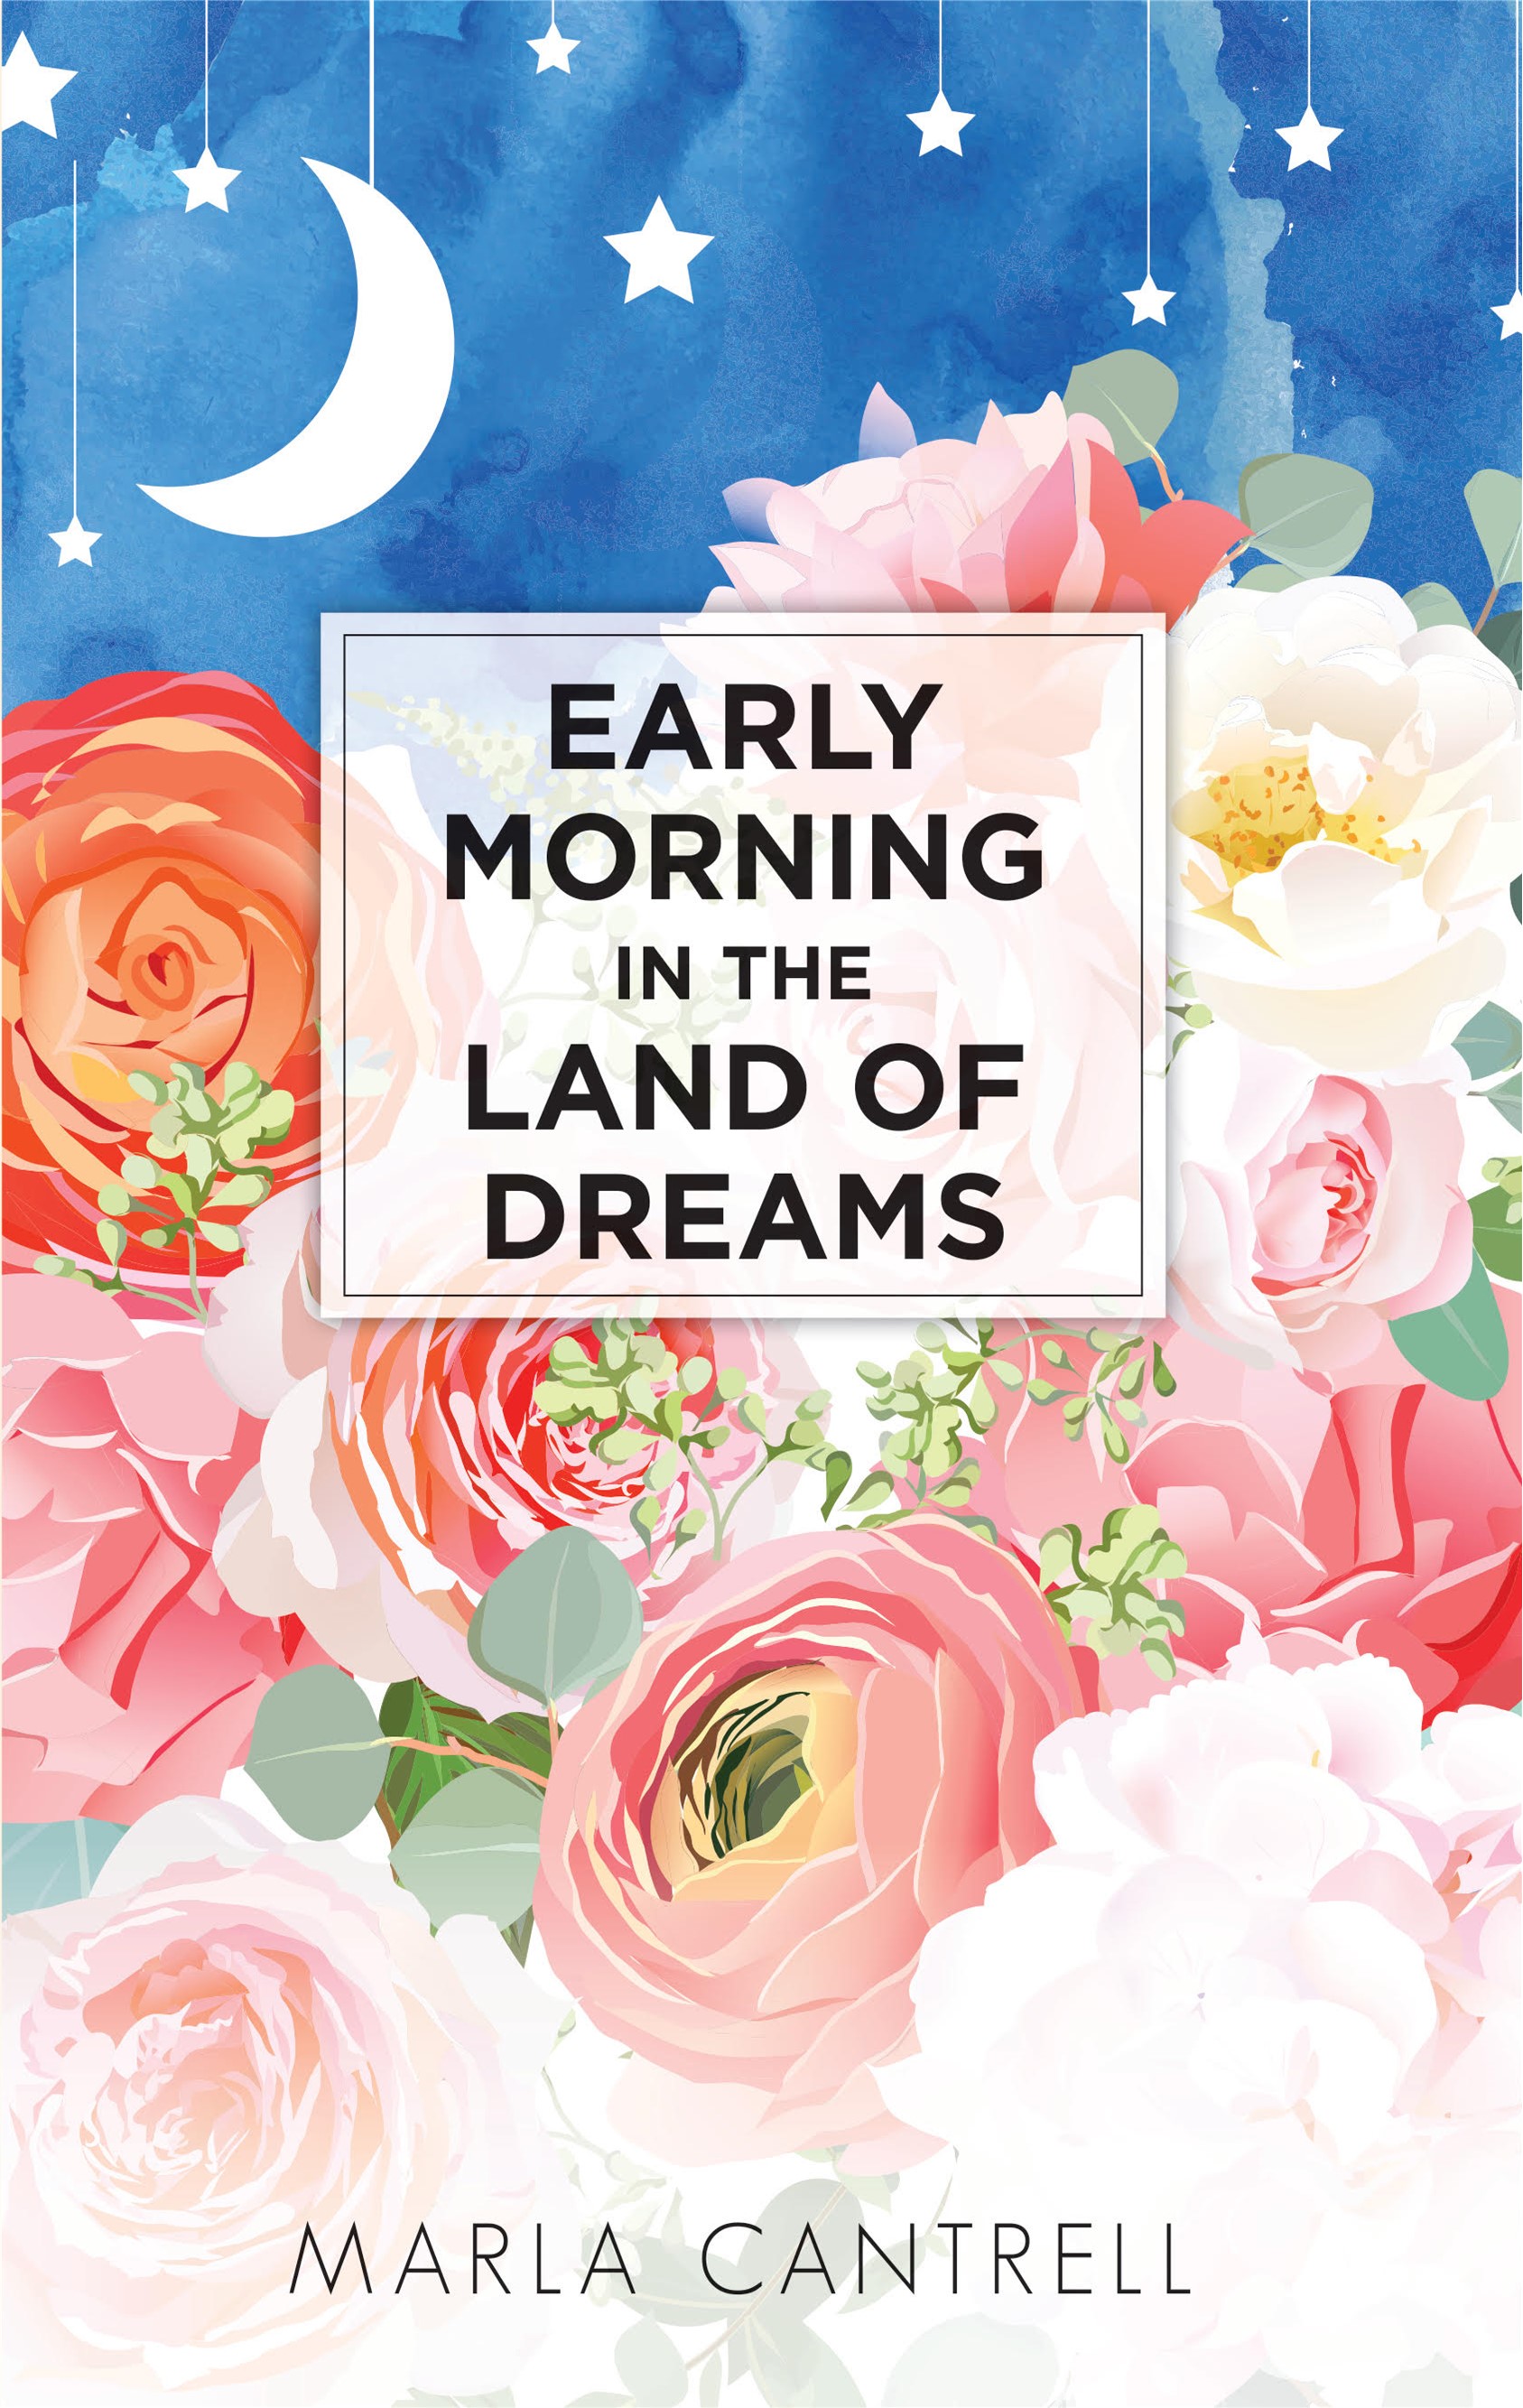 Early Morning in the Land of Dreams—EBOOK COVER FINAL (1)